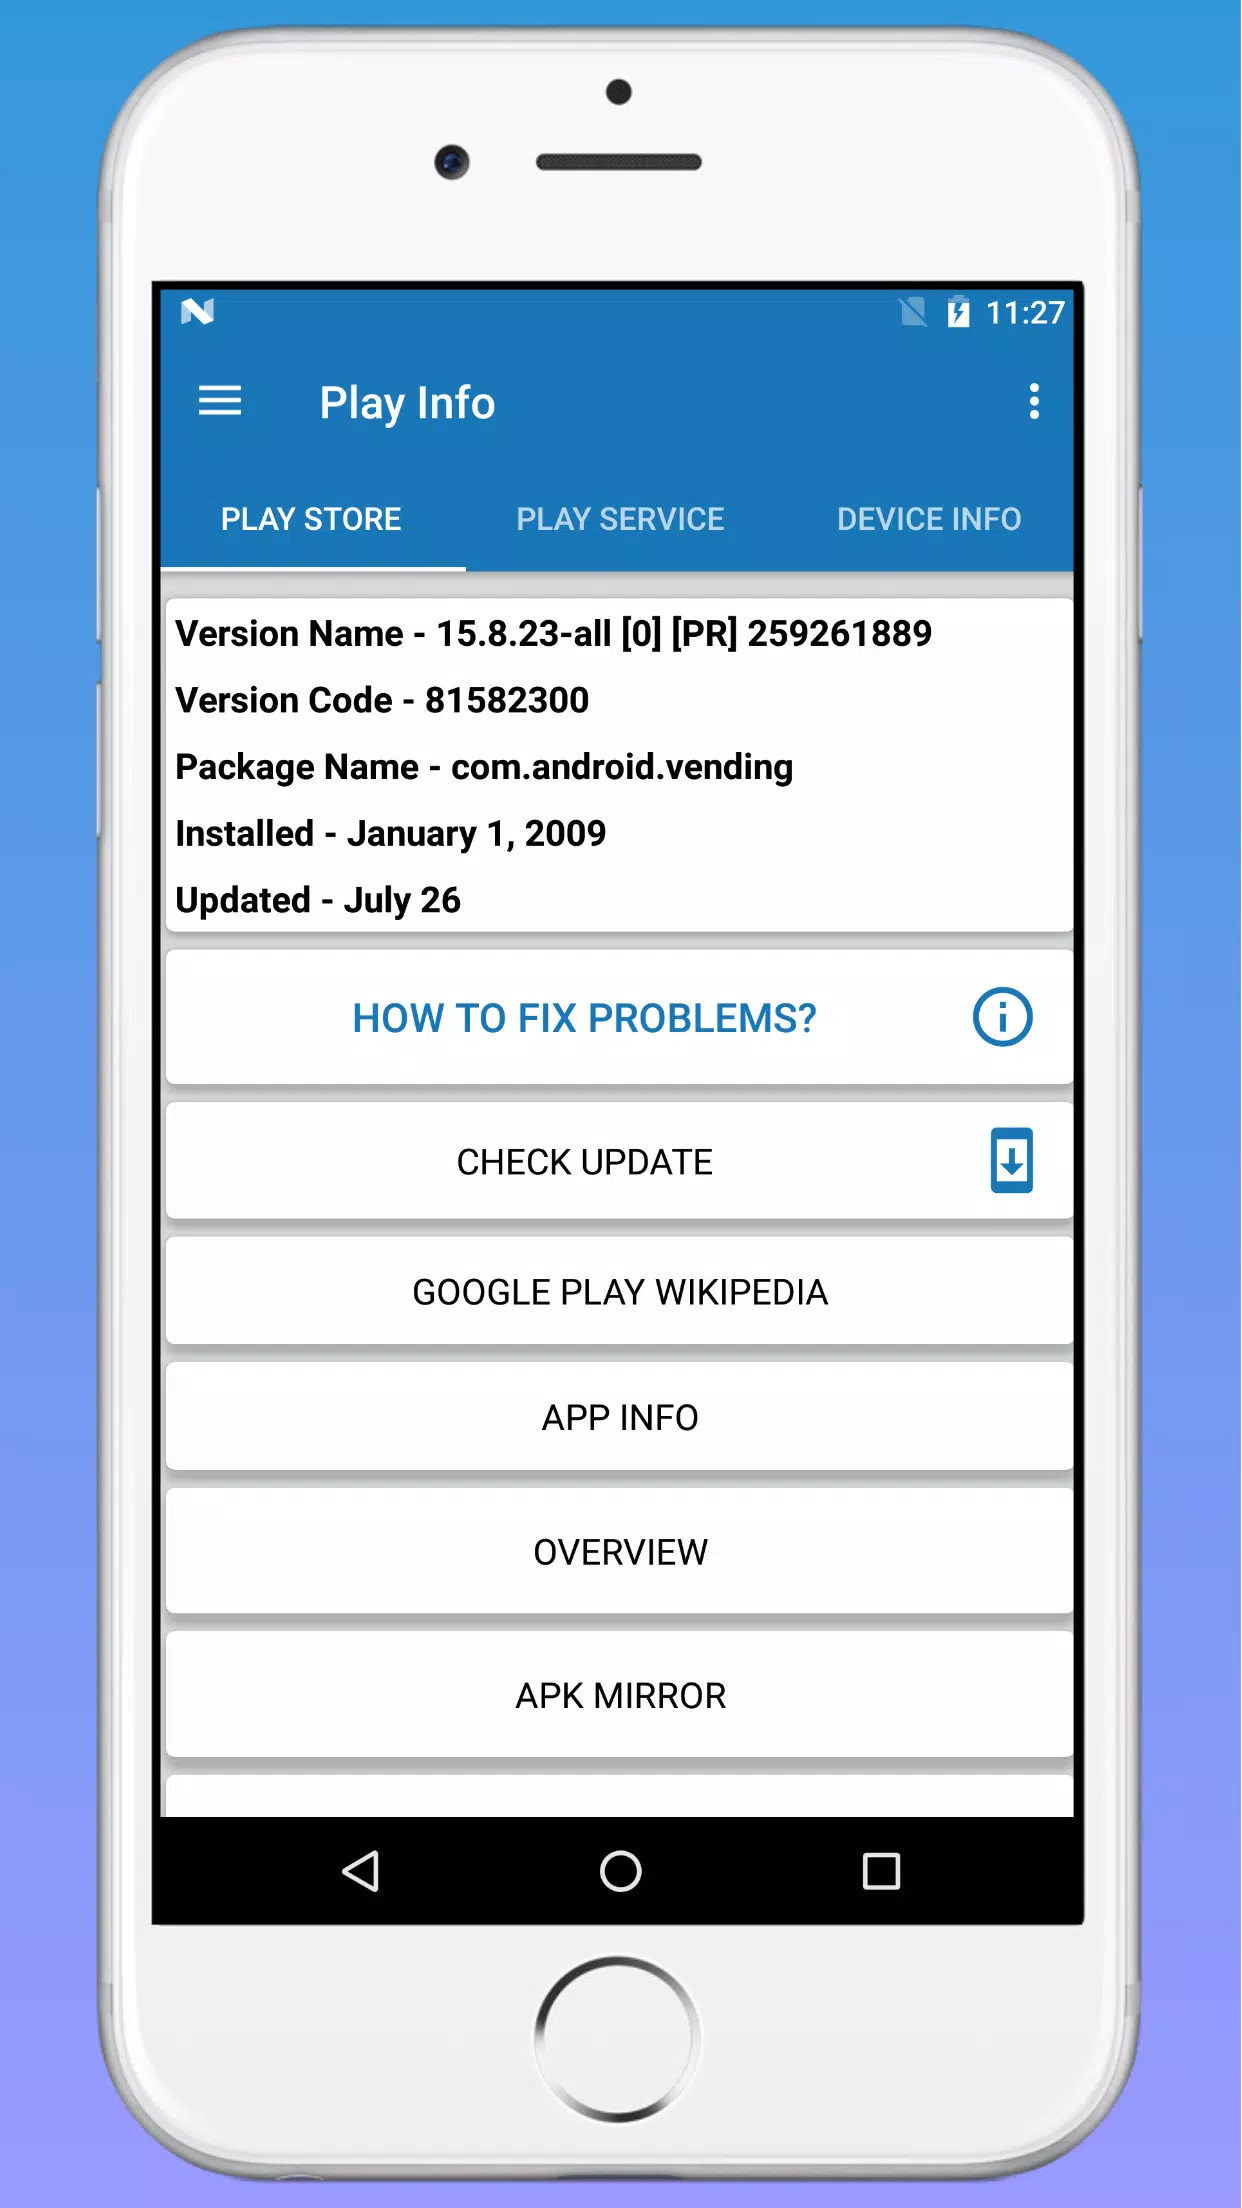 Download Play Services Info (Update) APKs for Android - APKMirror